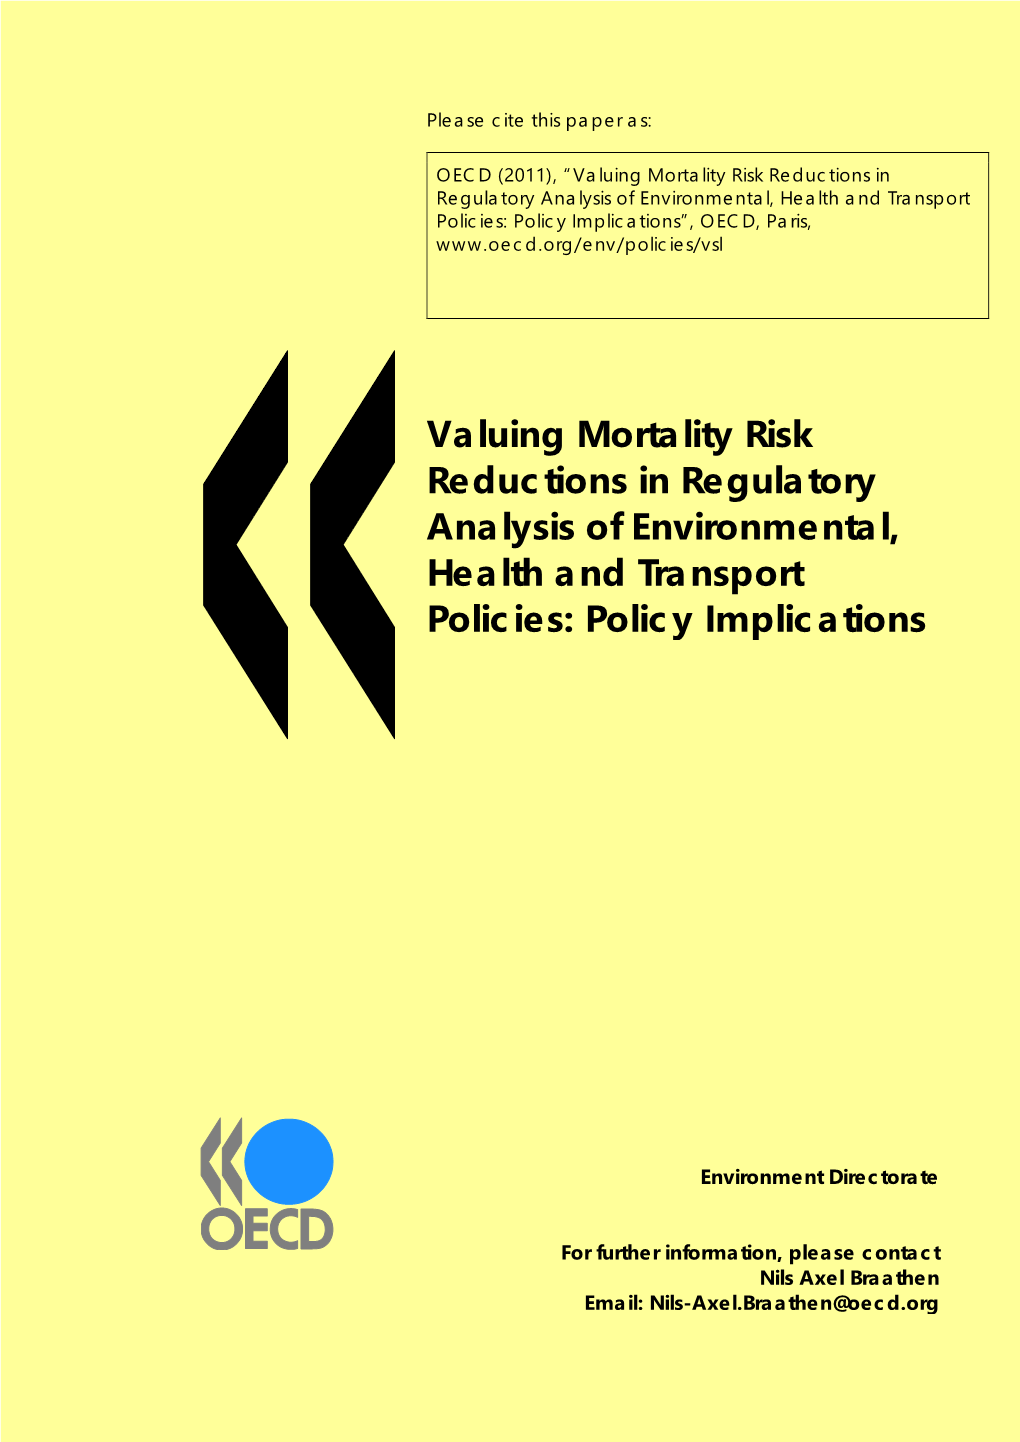 Valuing Mortality Risk Reductions in Regulatory Analysis Of